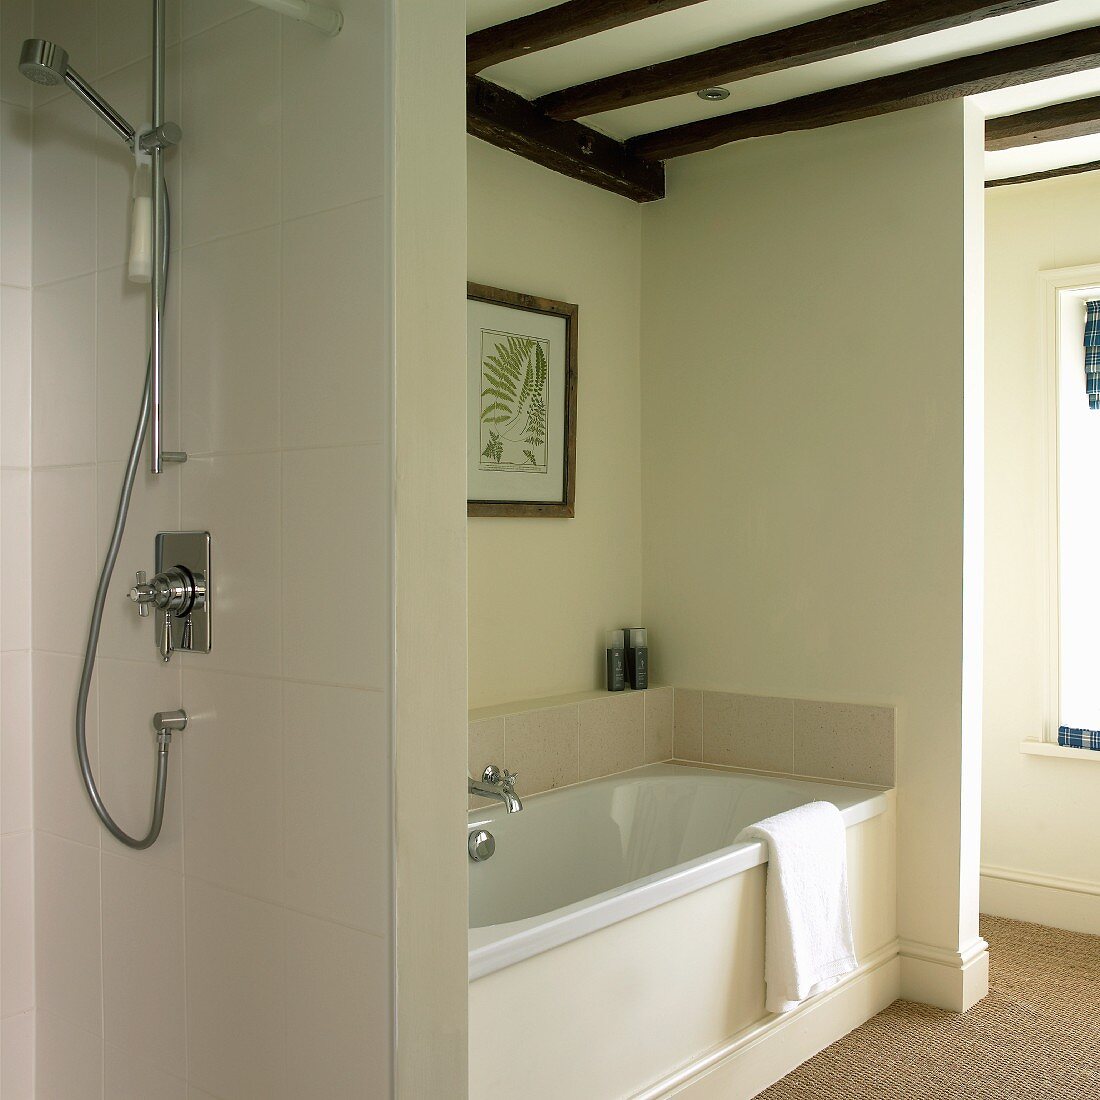 Fitted bathtub and open shower in renovated half-timbered house